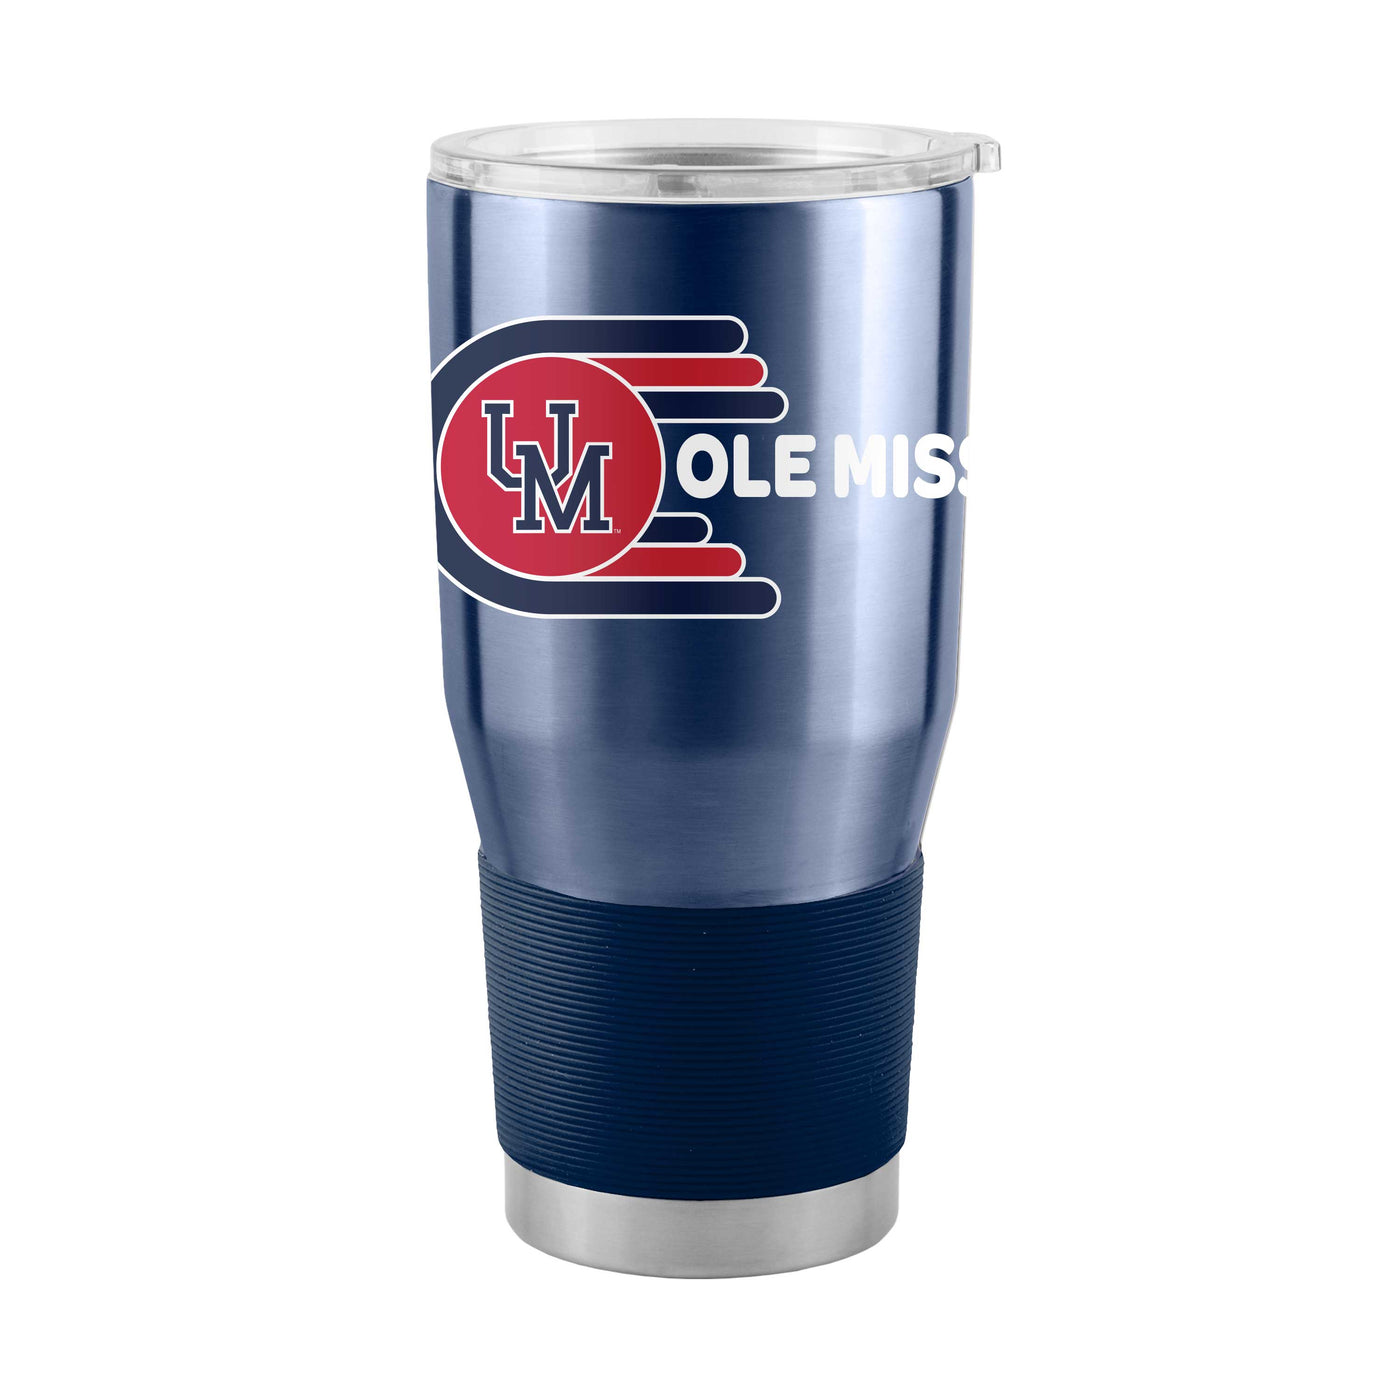 Ole Miss 30oz Whirl Stainless Steel Tumbler